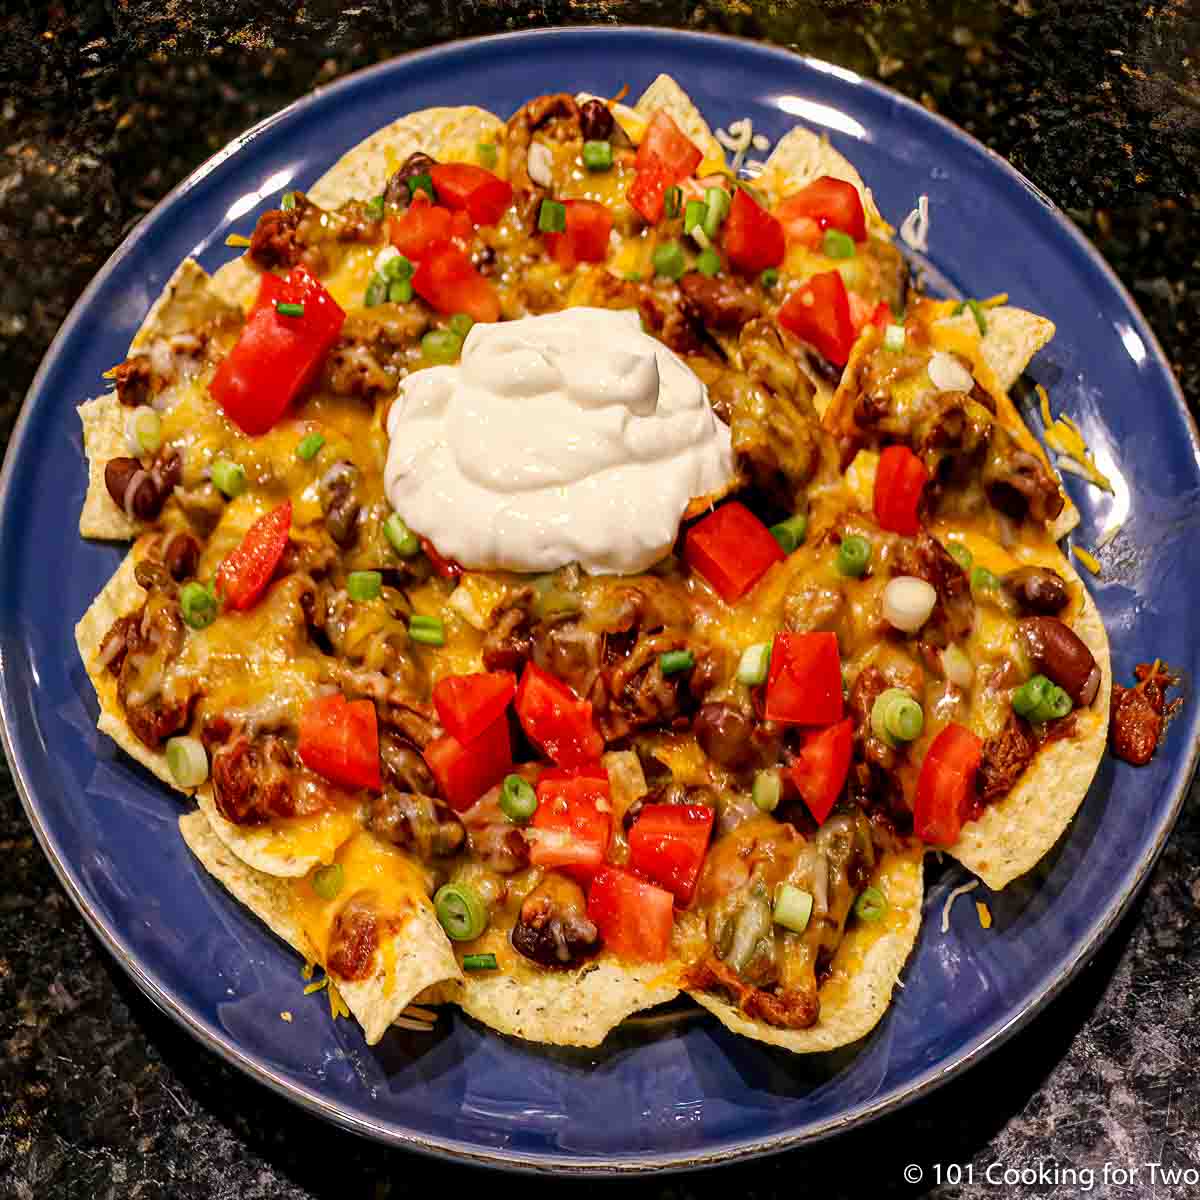 plate of cheese chili nachos topped with tomatos and sour cream.